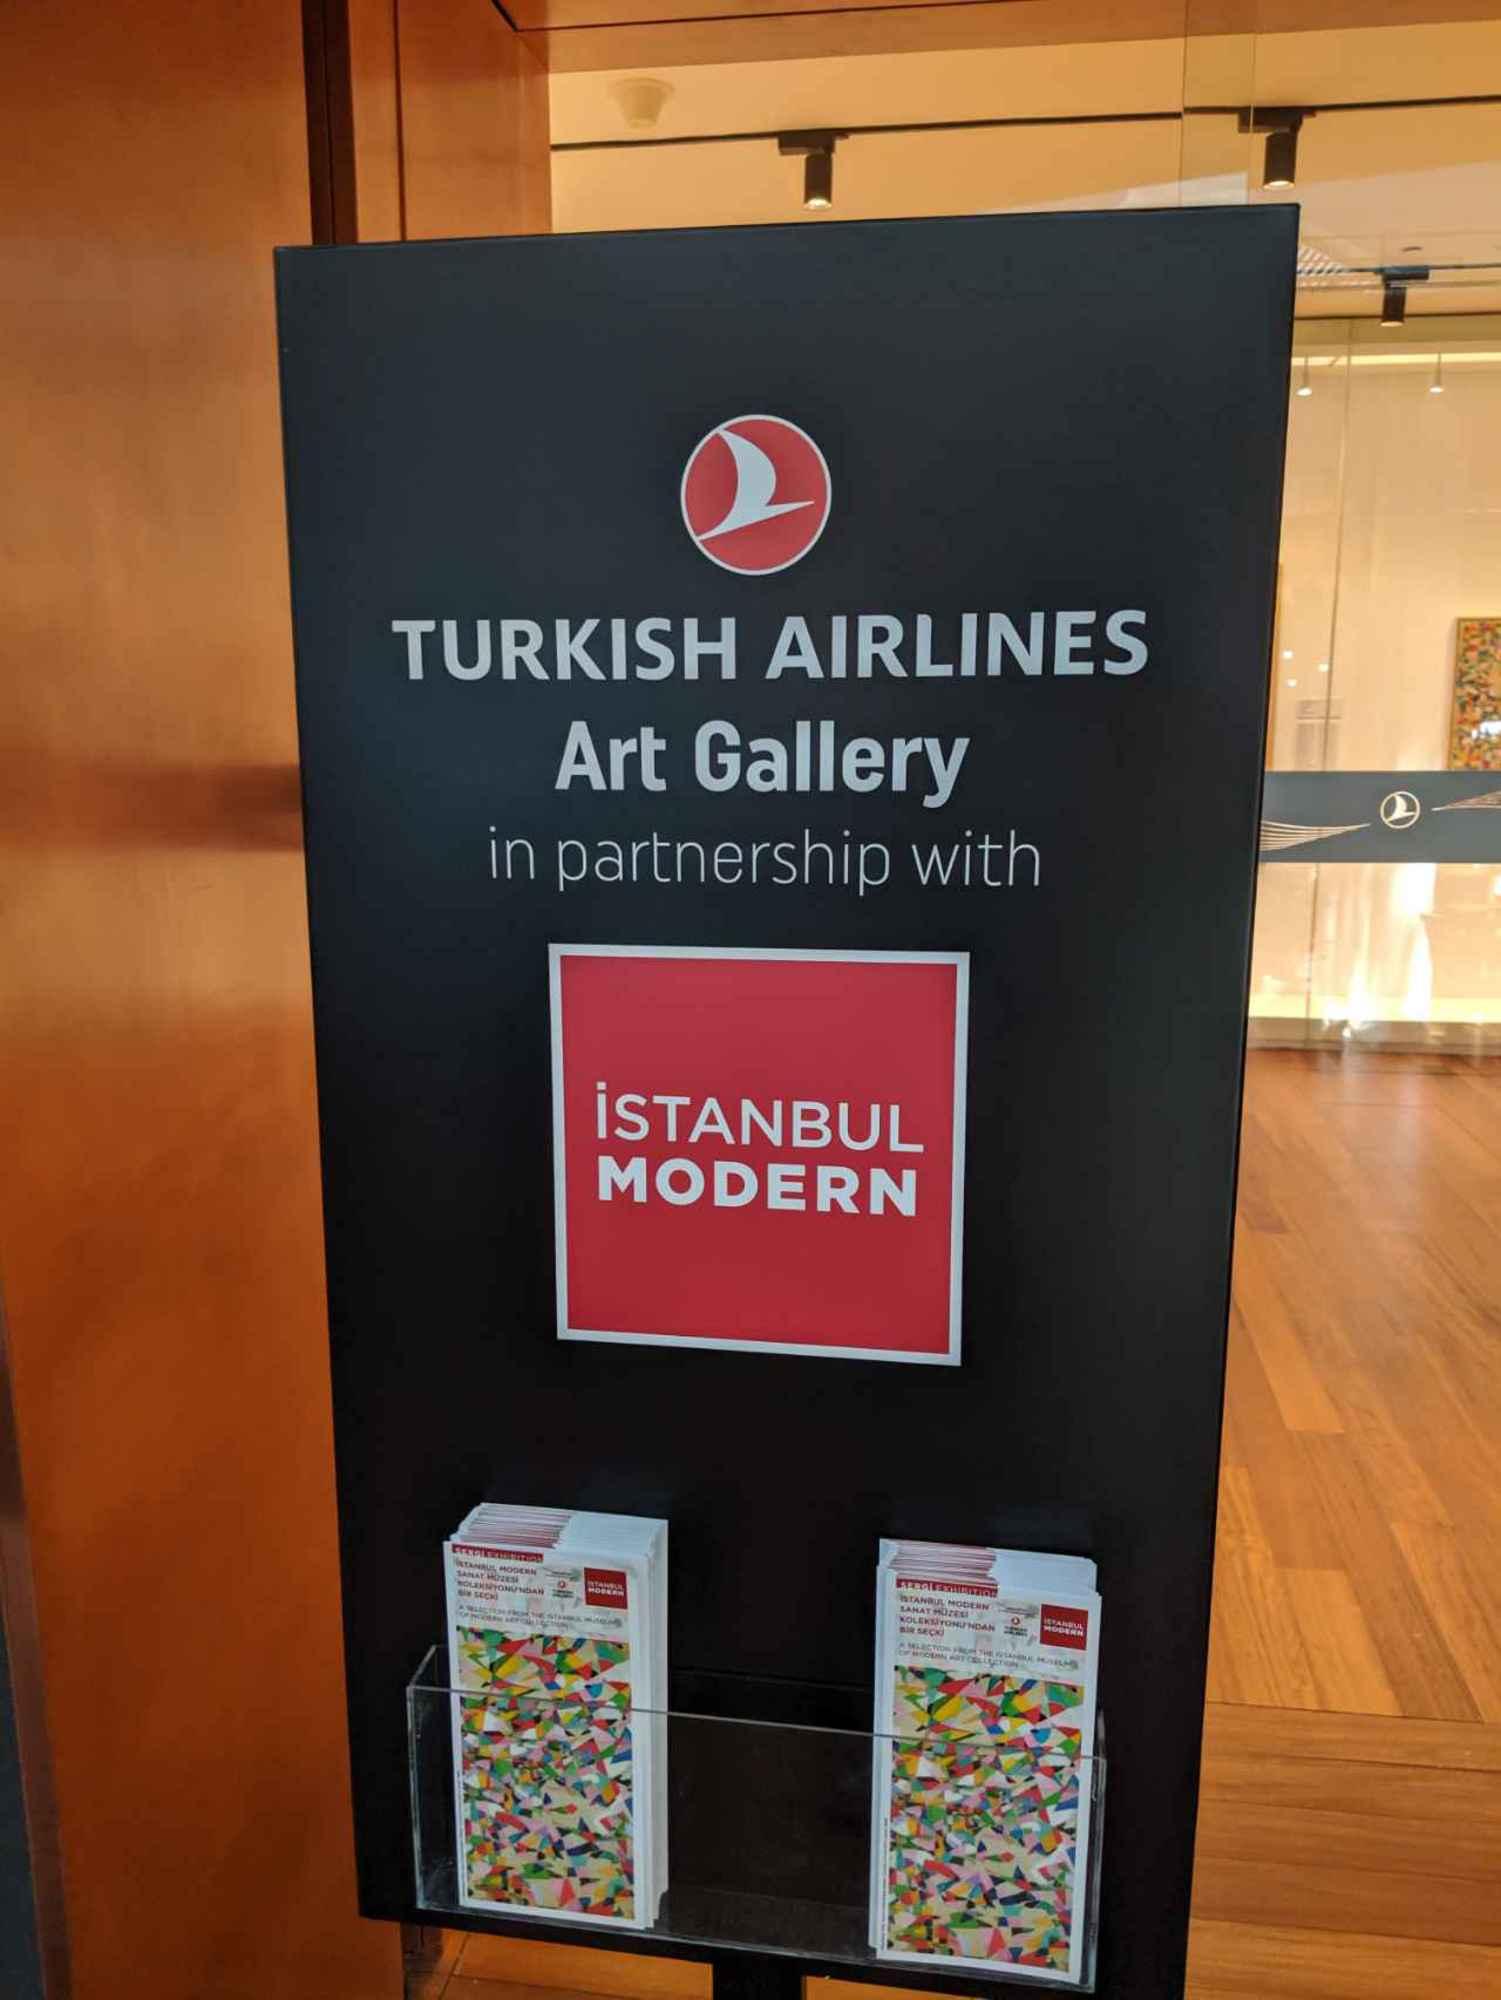 Turkish Airlines Business Lounge image 5 of 8